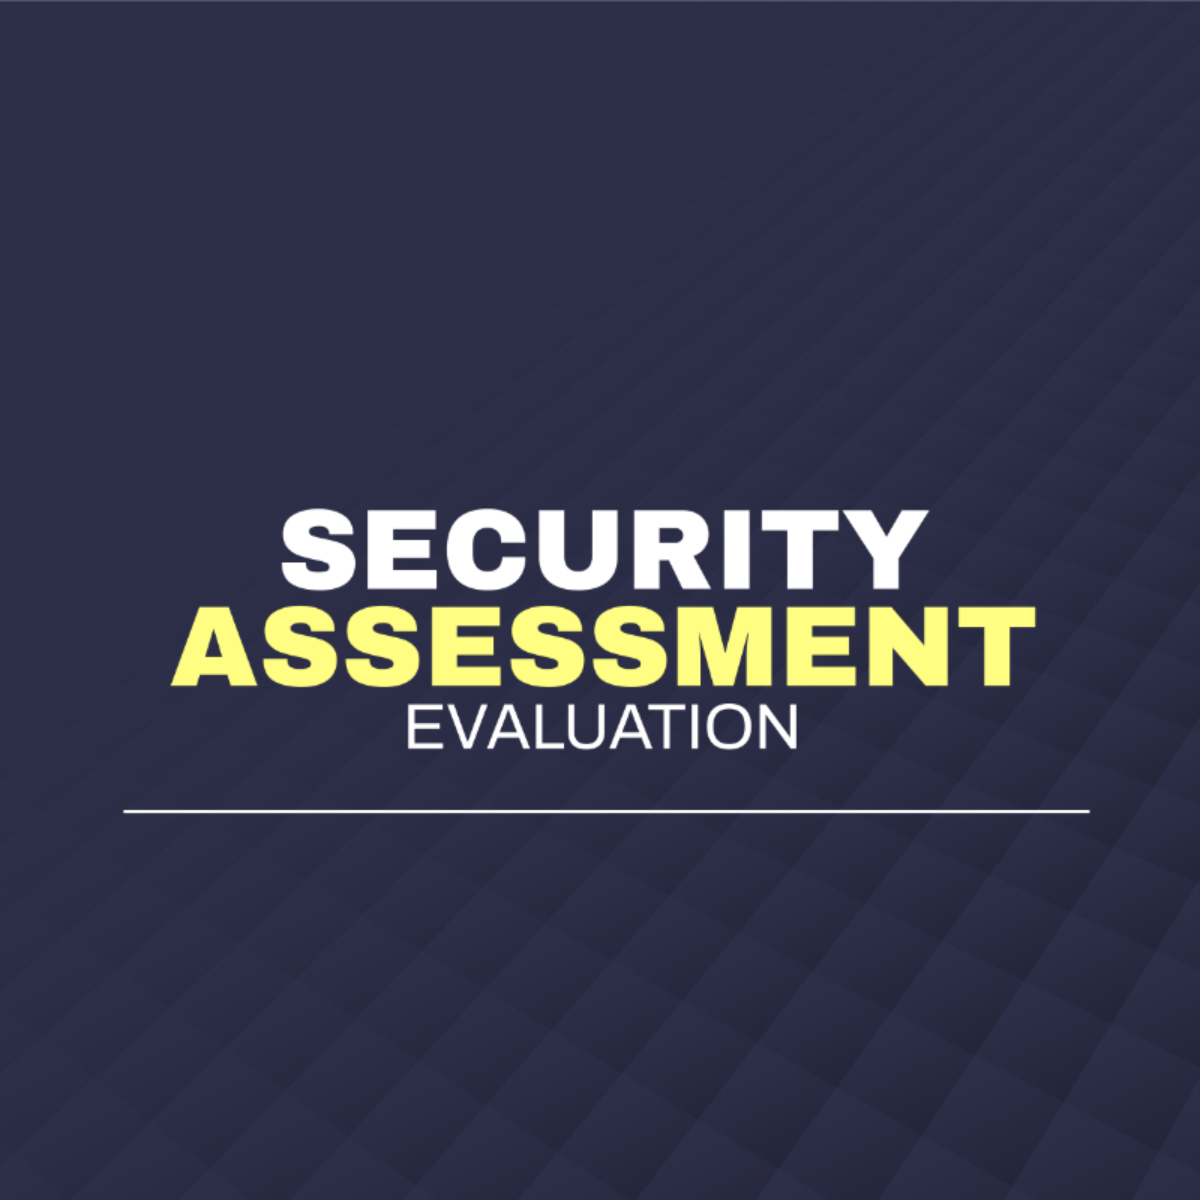 Free Security Assessment Evaluation Template